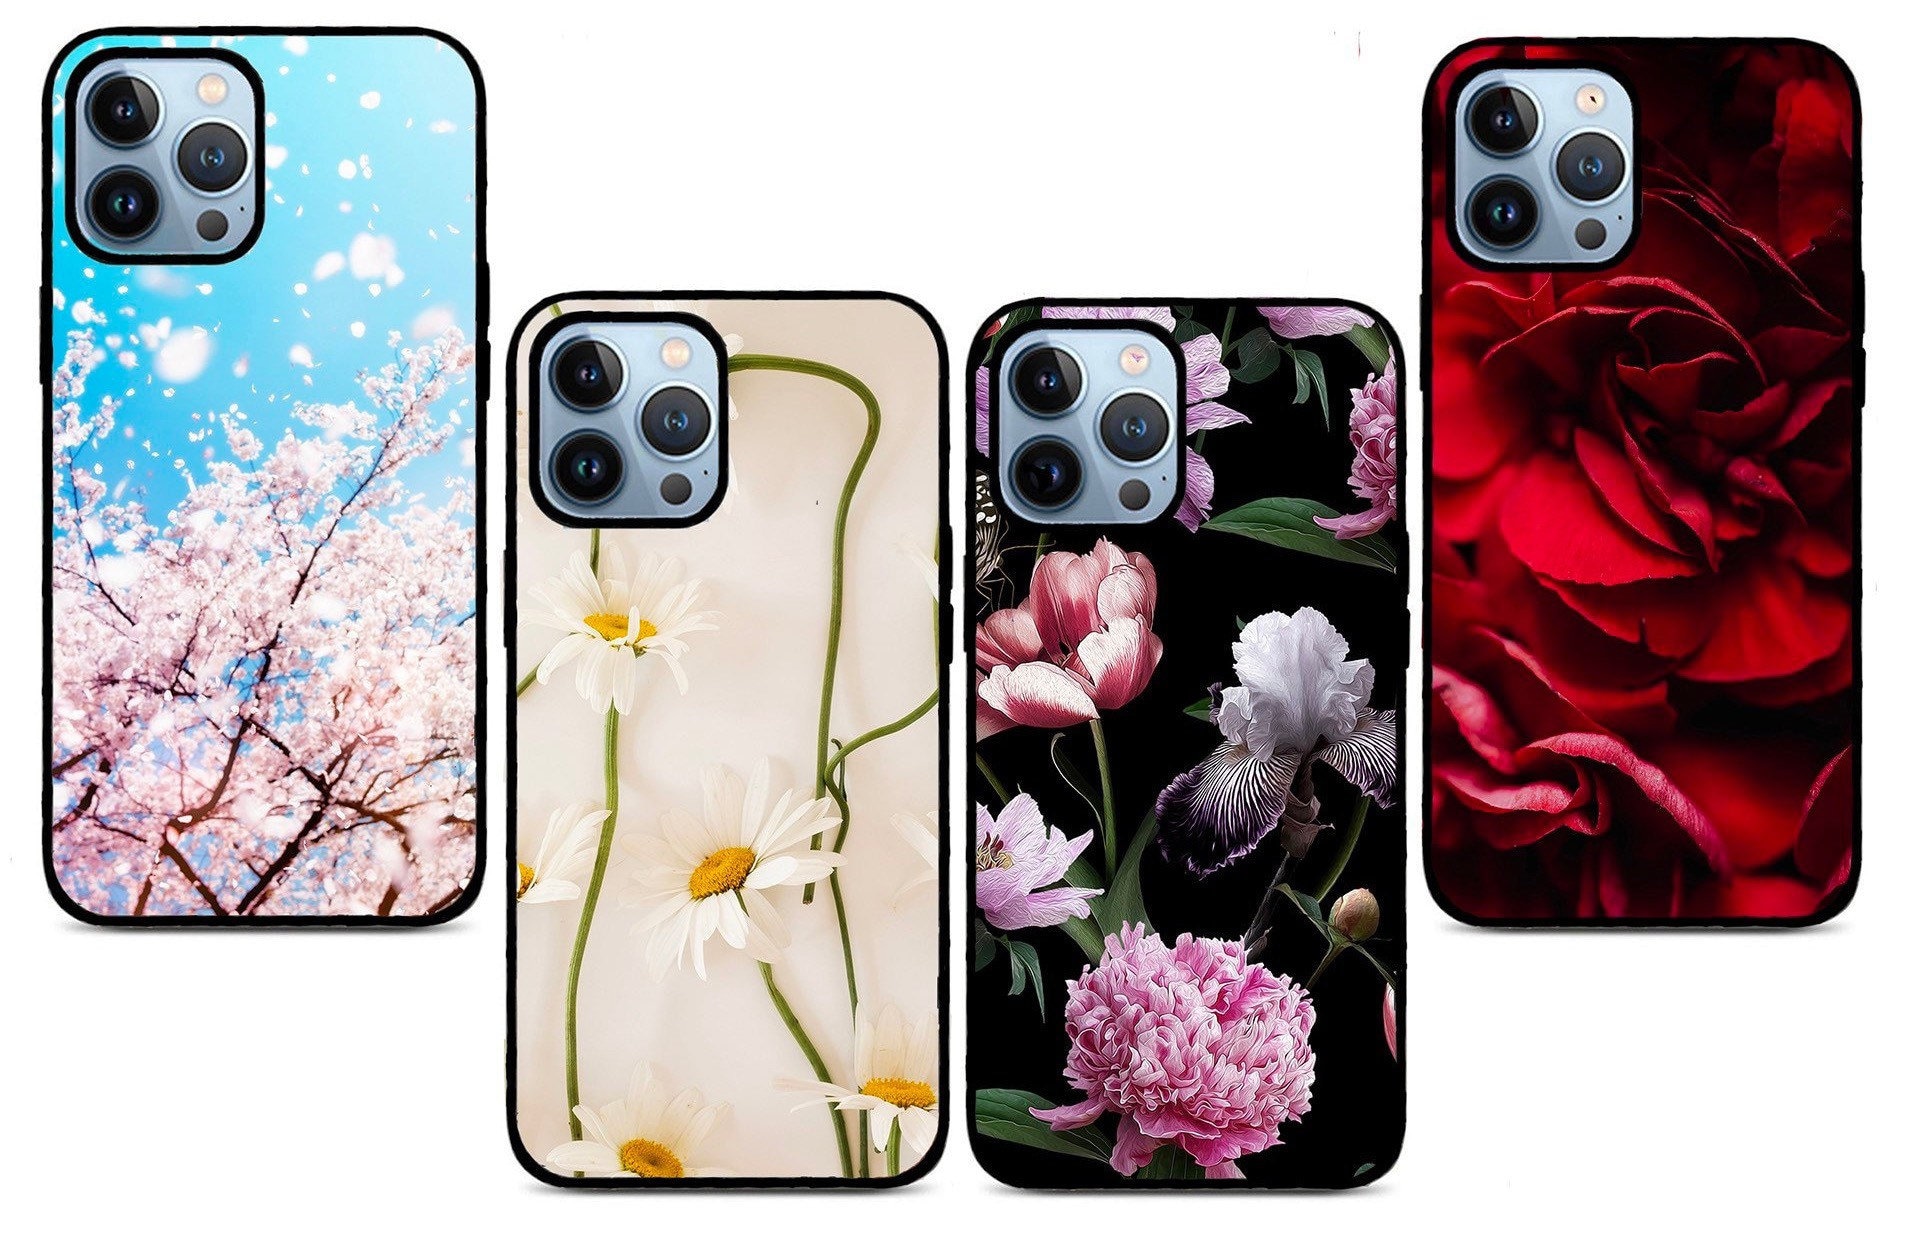 Flowers Iphone Coque Fits Models Iphone 14, Iphone 13, Iphone 12 & Iphone 11 Models Fk-32891-0